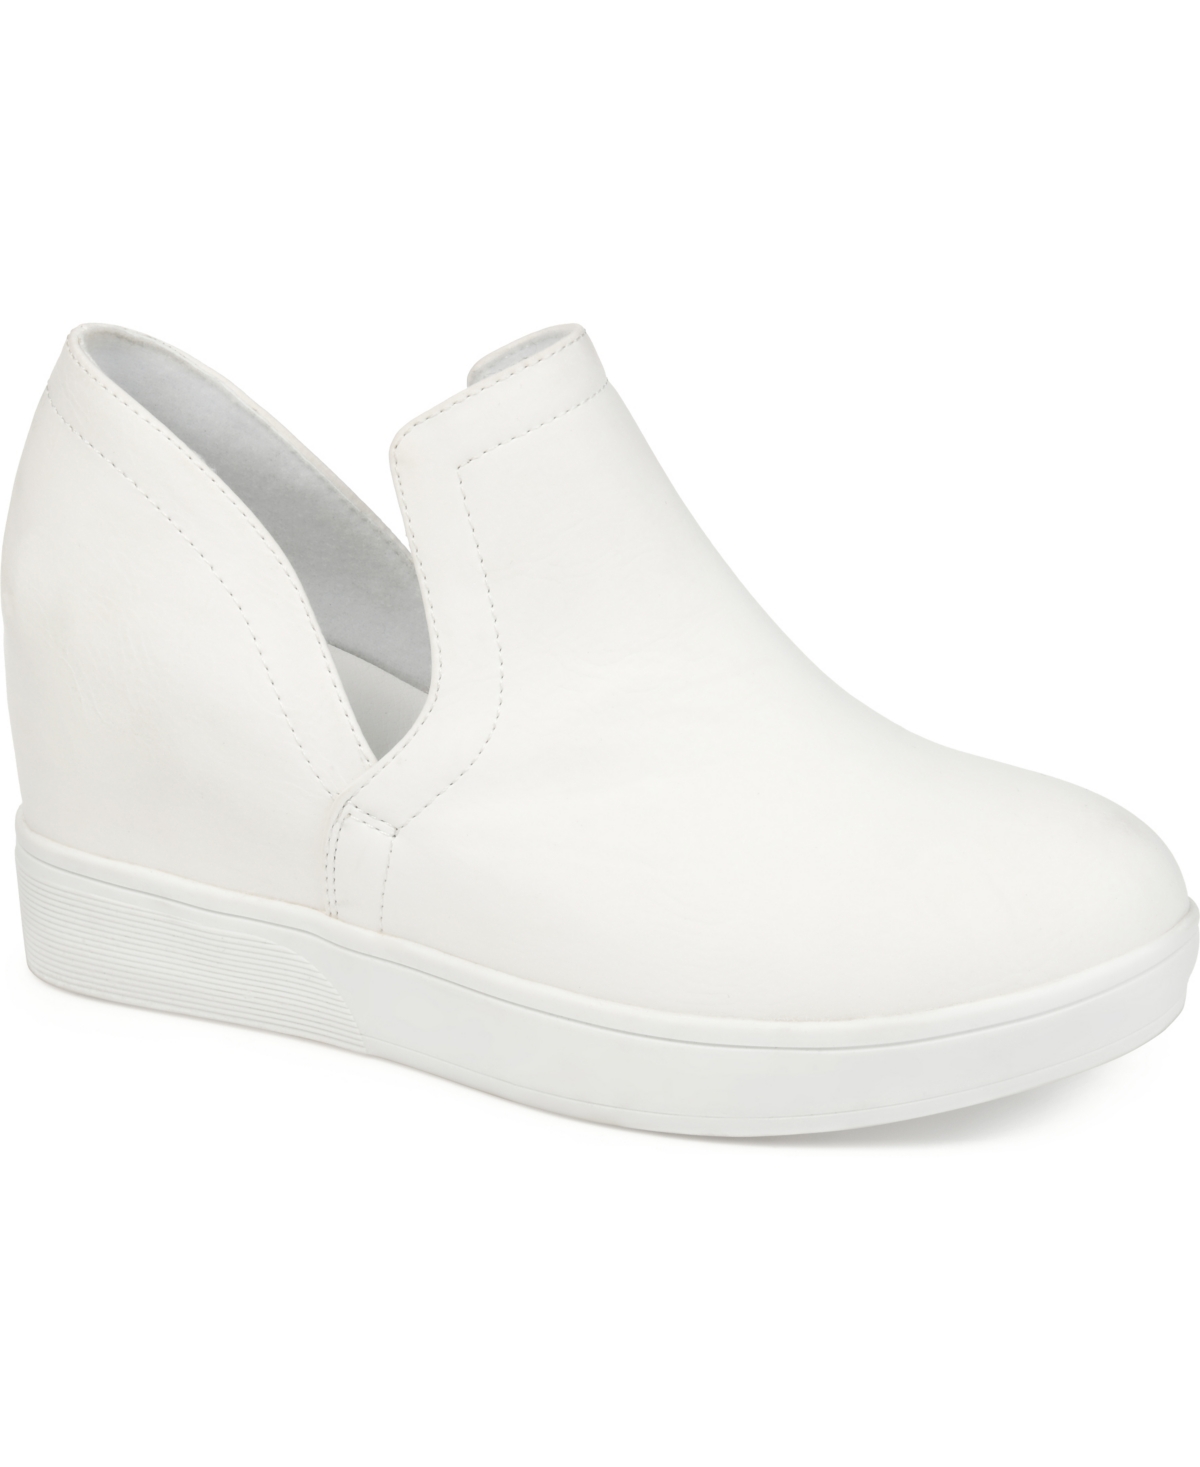 Women's Cardi Cut-Out Platform Wedge Sneakers - White